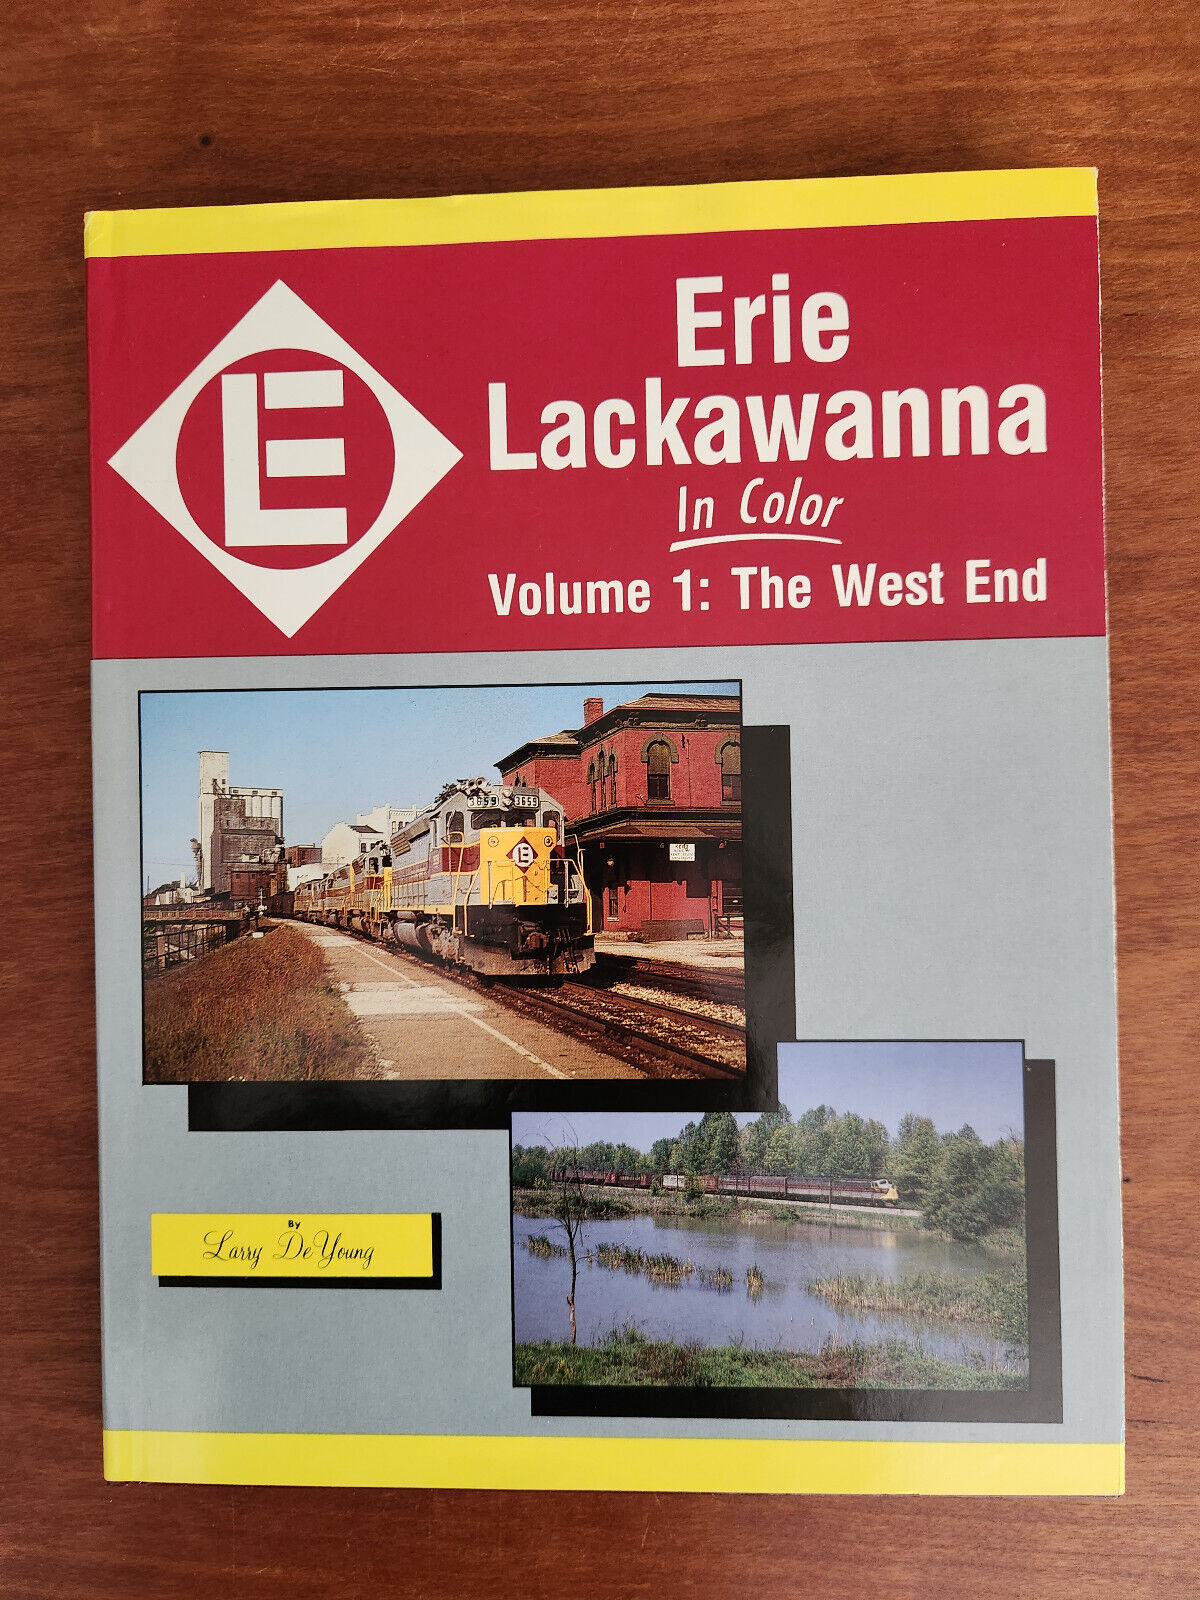 Erie Lackawanna in color. 8 volume set. Hardcover, very good condition 